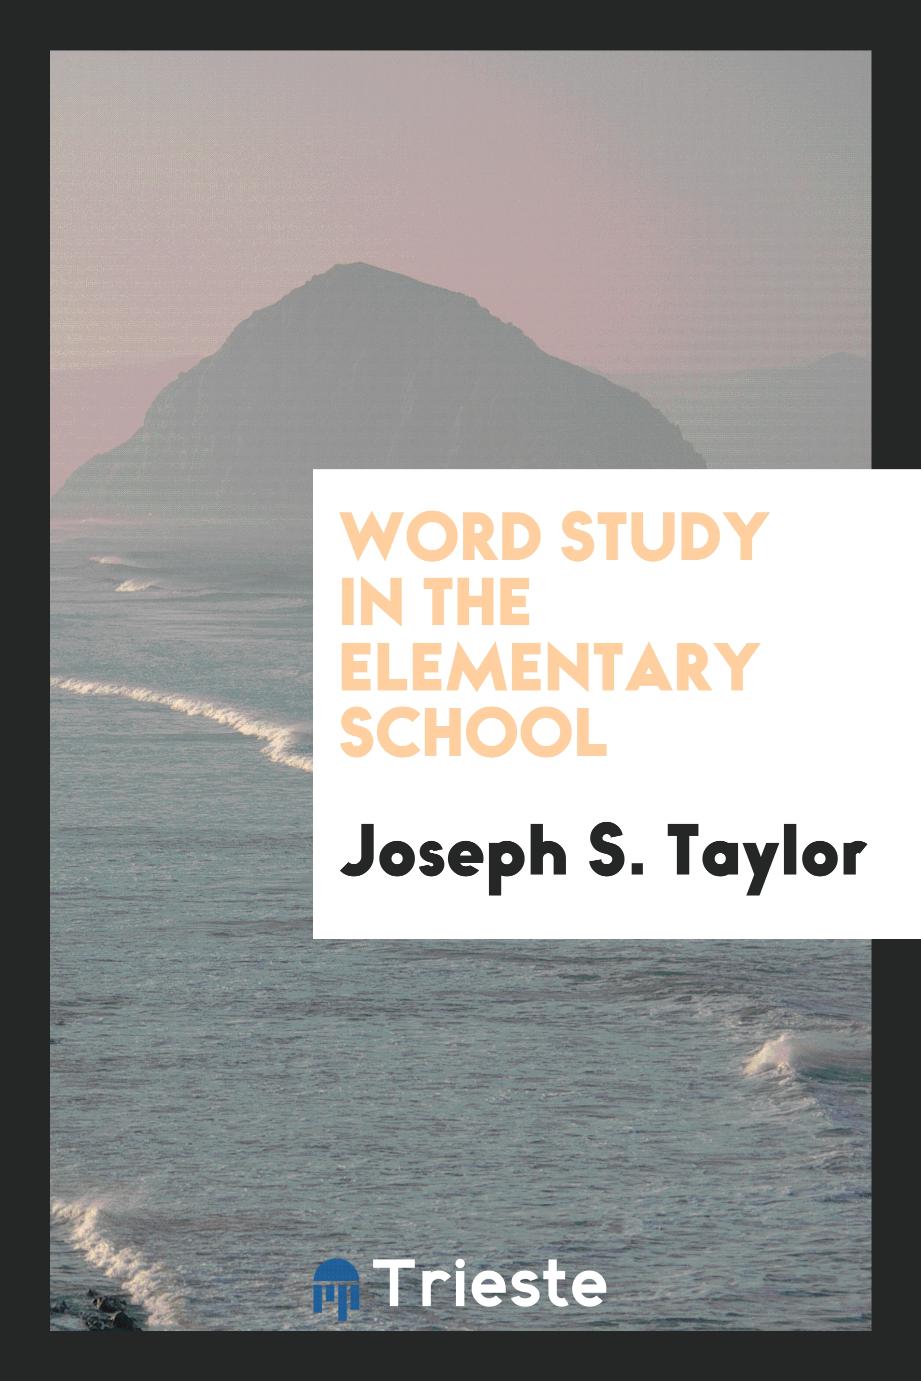 Word study in the elementary school